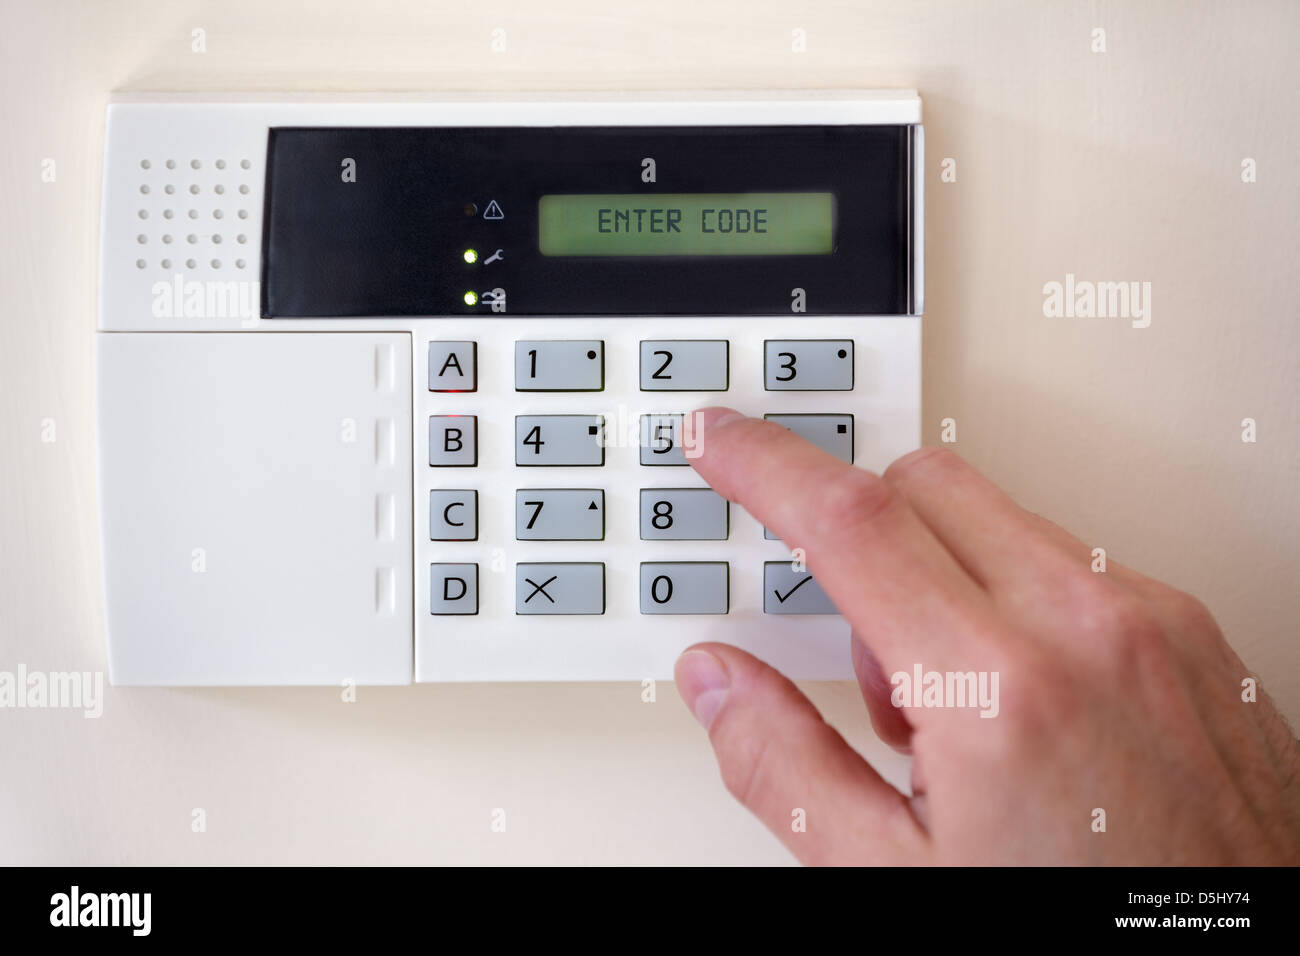 Home security Stock Photo